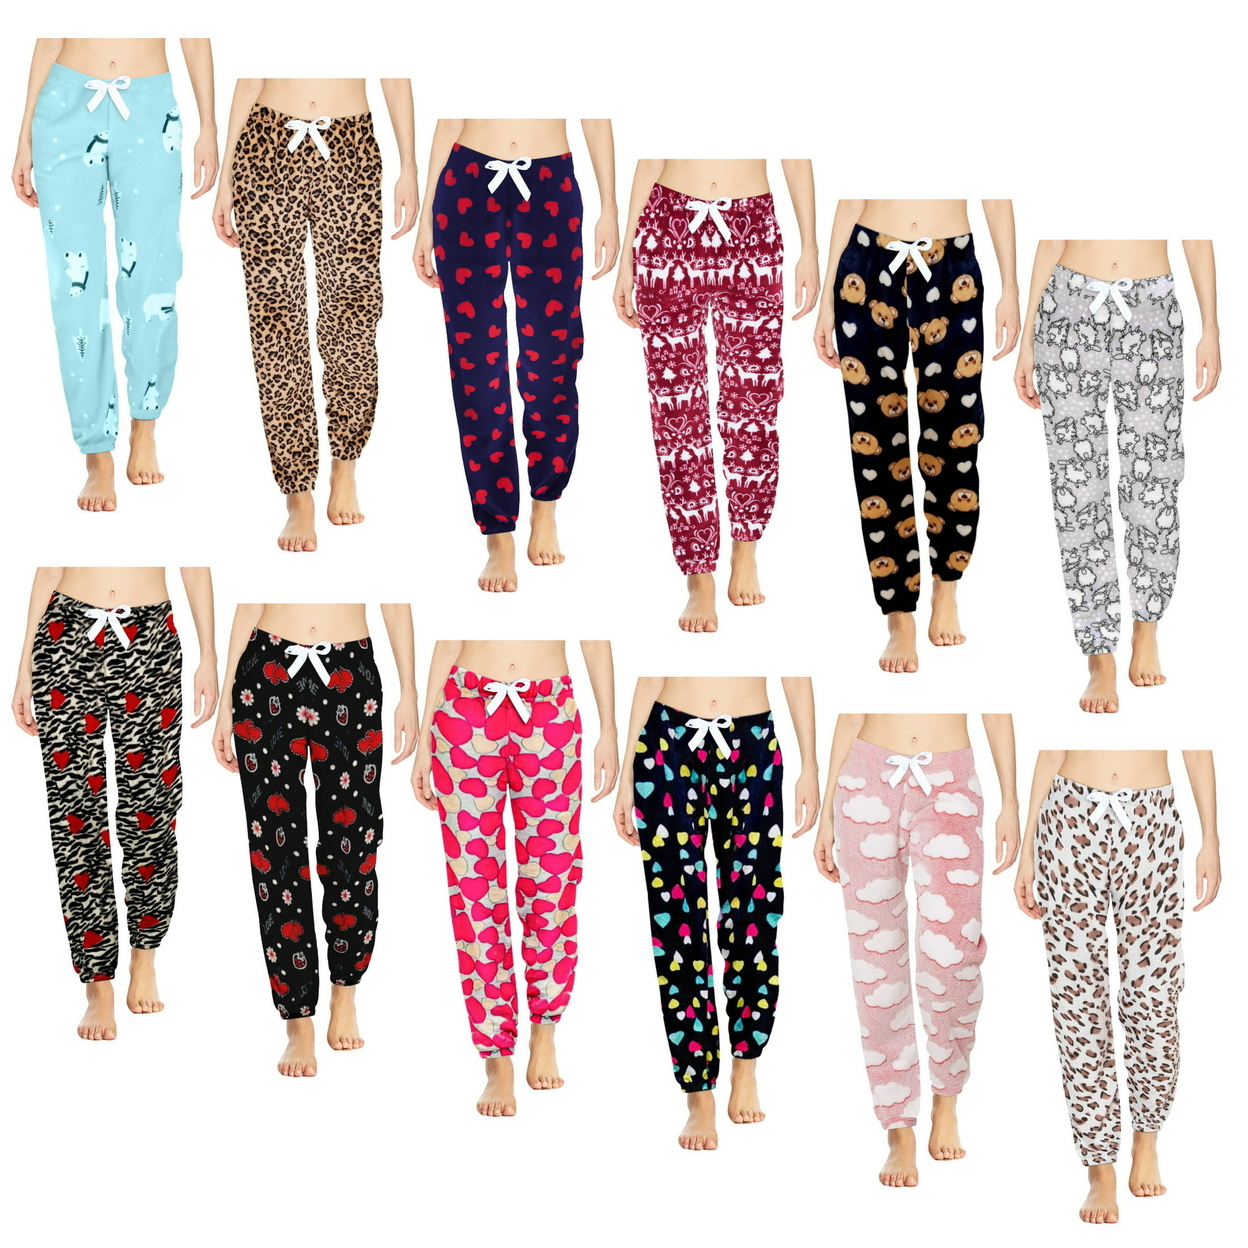 Multi-Pack: Women's Printed Ultra-Soft Comfy Stretch Micro-Fleece Pajama Lounge Pants - 1-pack, Shapes, Small